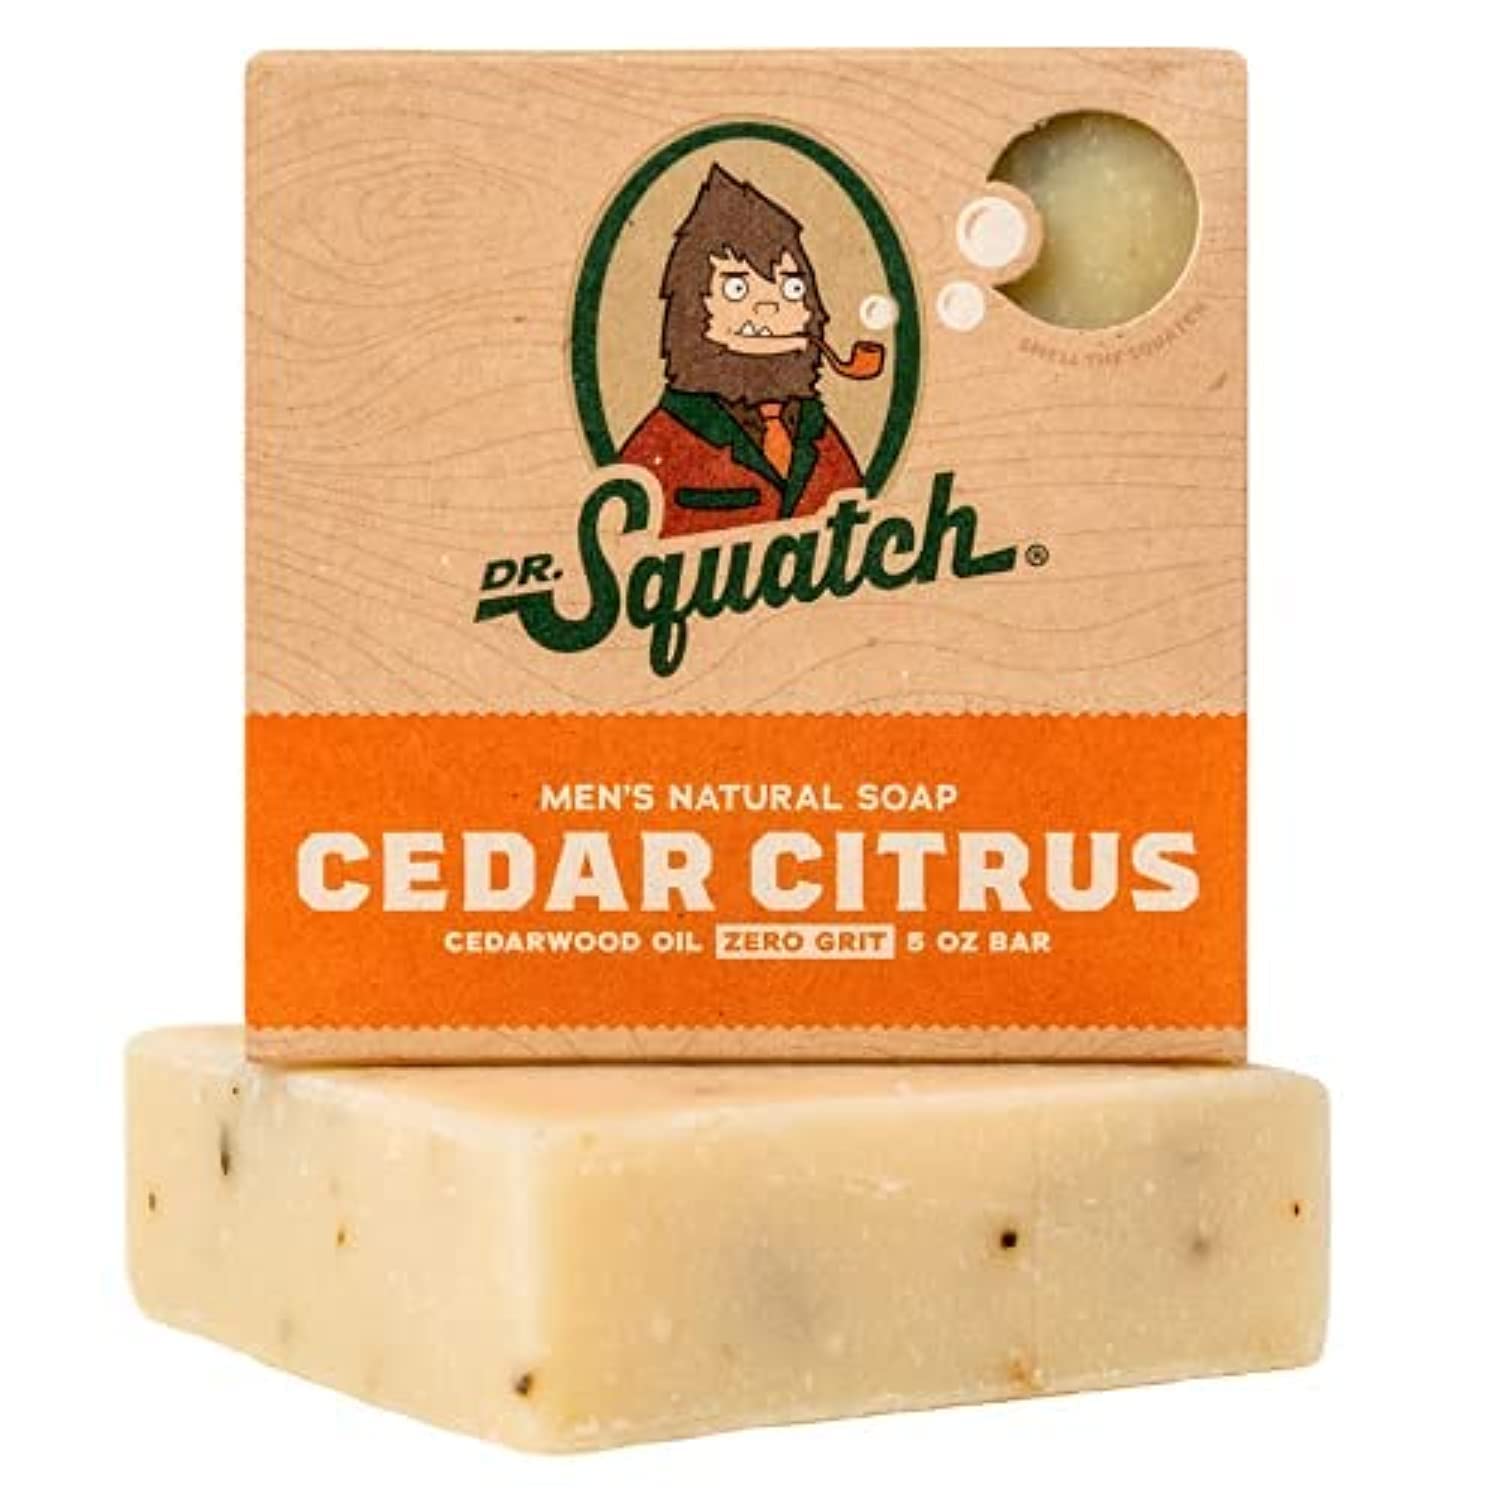 Dr Squatch “CRYPTO CLEANSE” 5oz soap bar *LIMITED EDITION*OUT OF